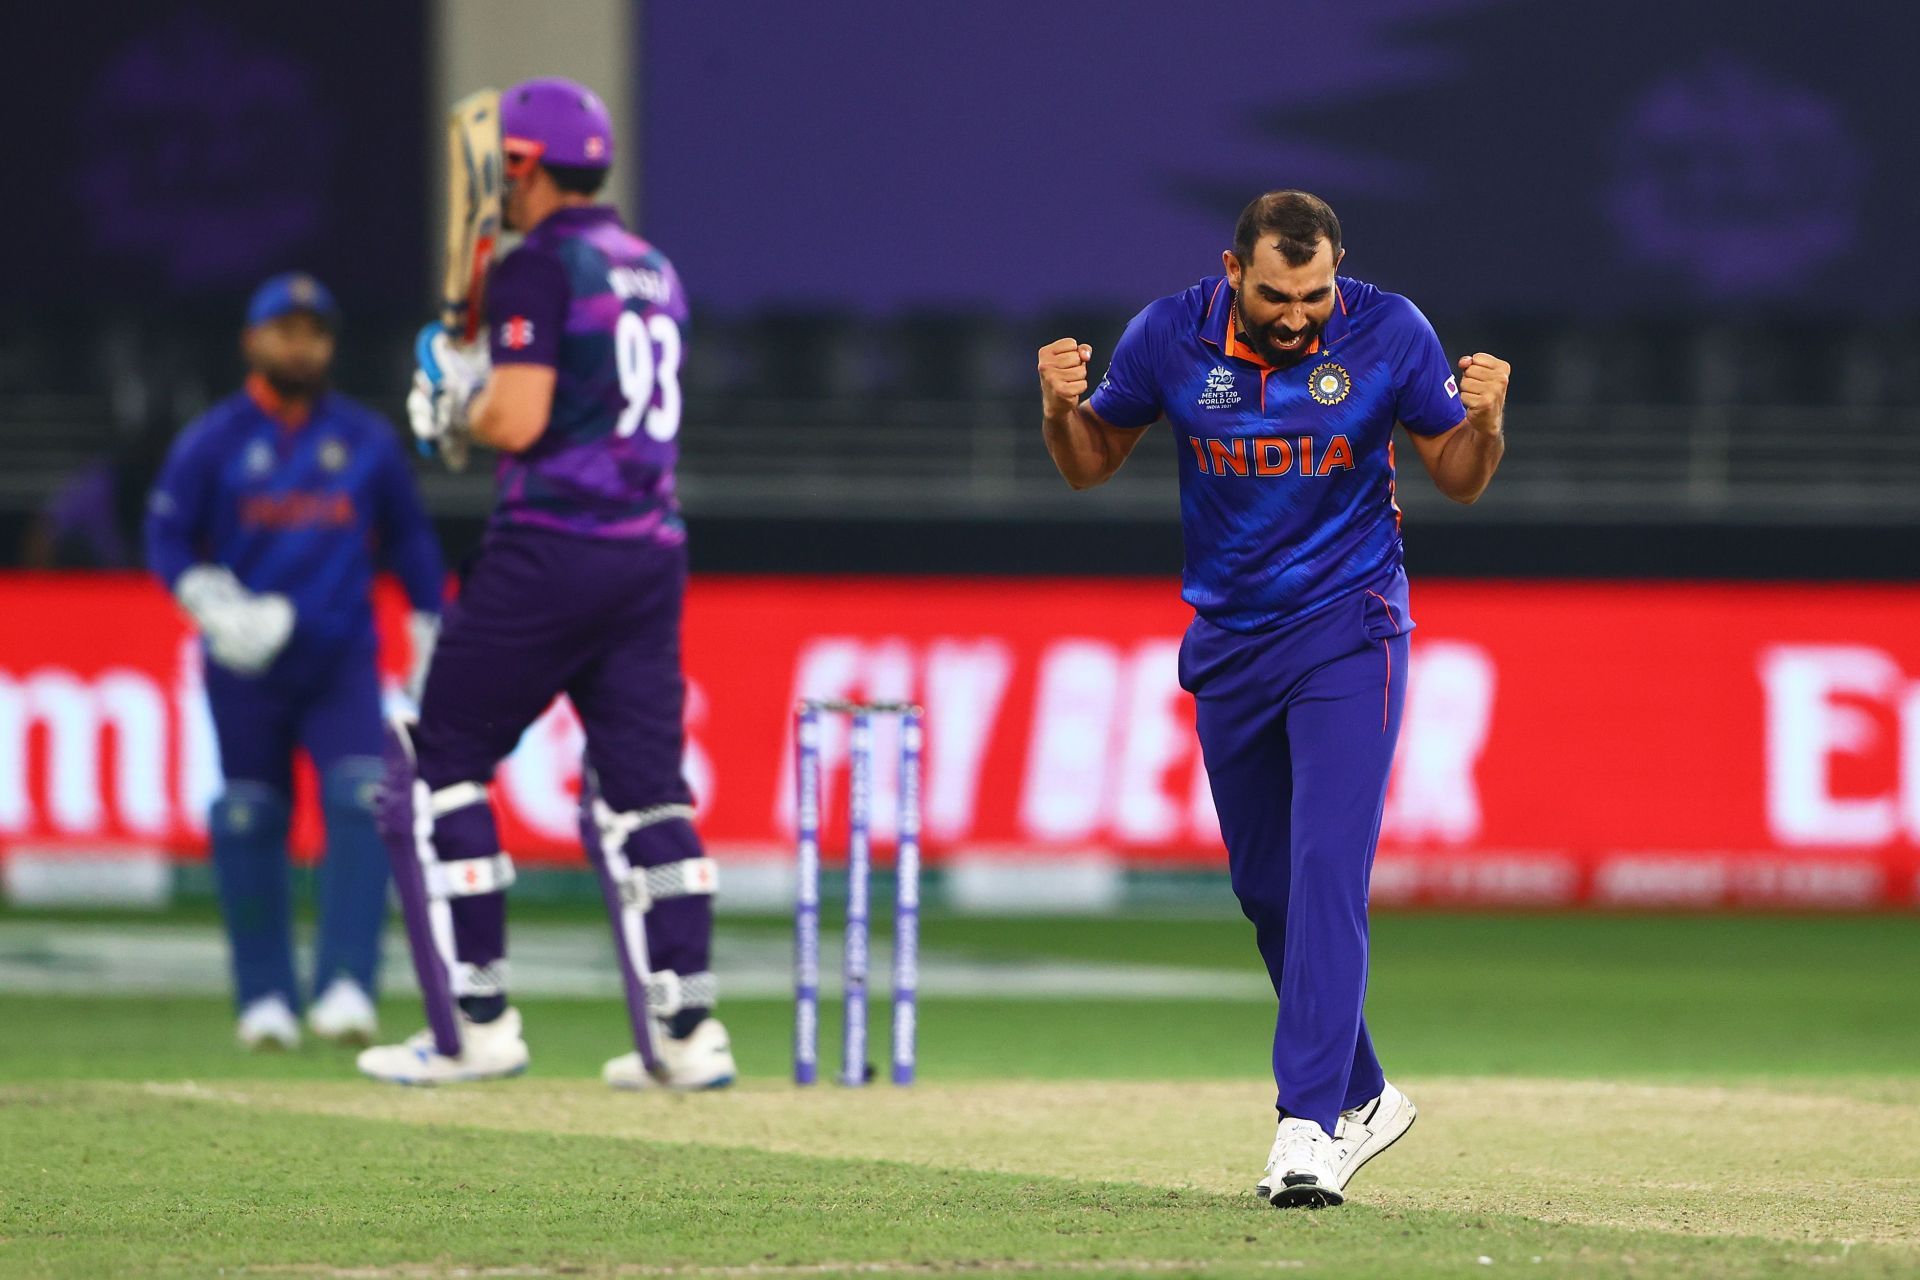 Mohammad Shami last played a T20I in the T20 World Cup 2021.